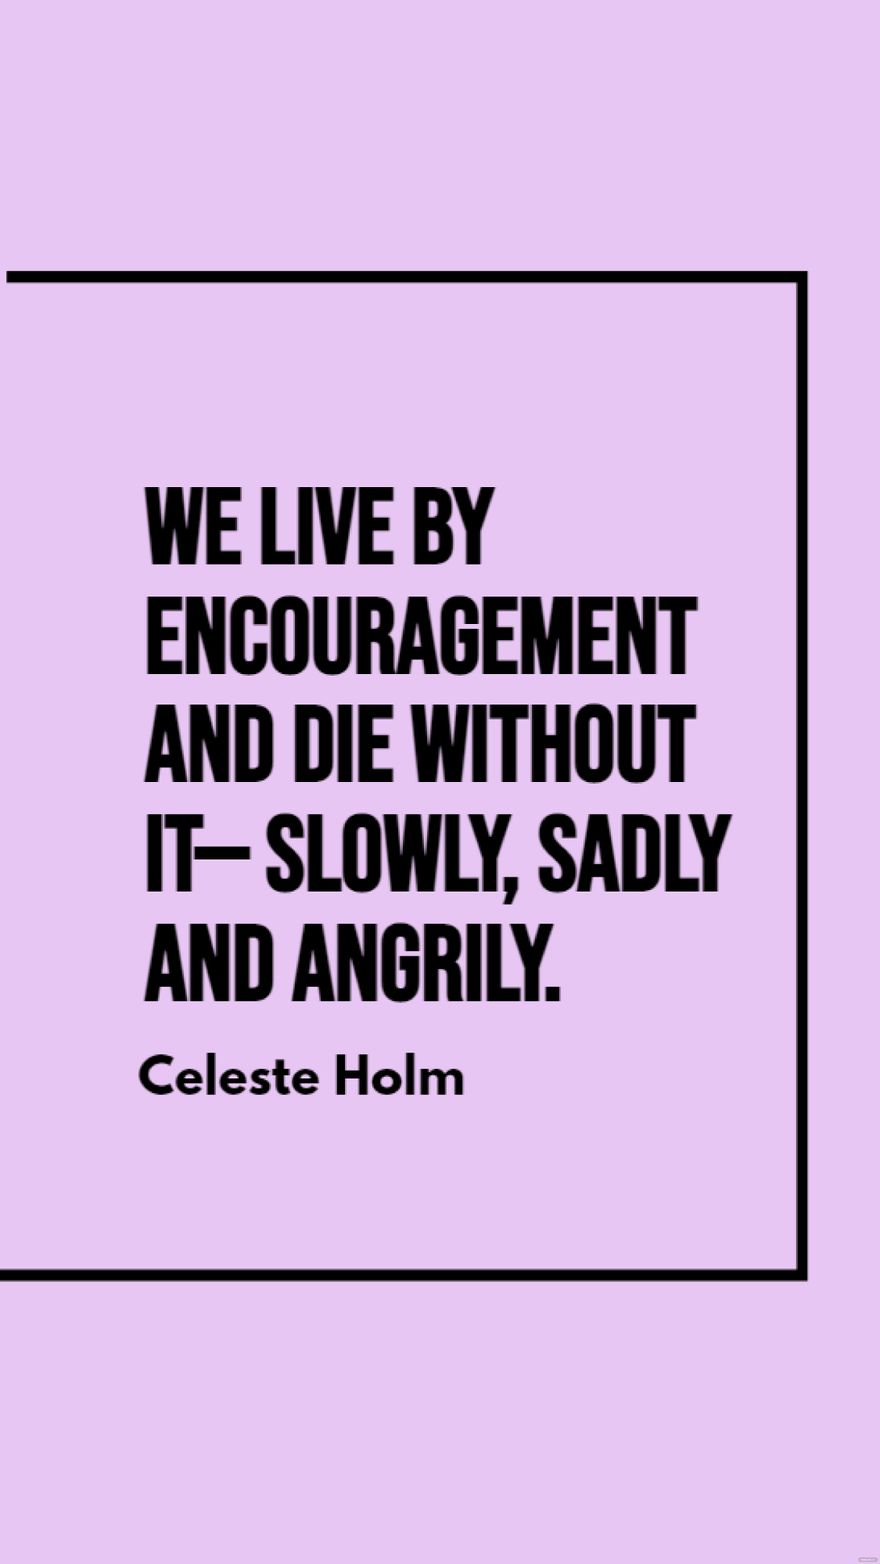 Free Celeste Holm - We live by encouragement and die without it - slowly, sadly and angrily. in JPG